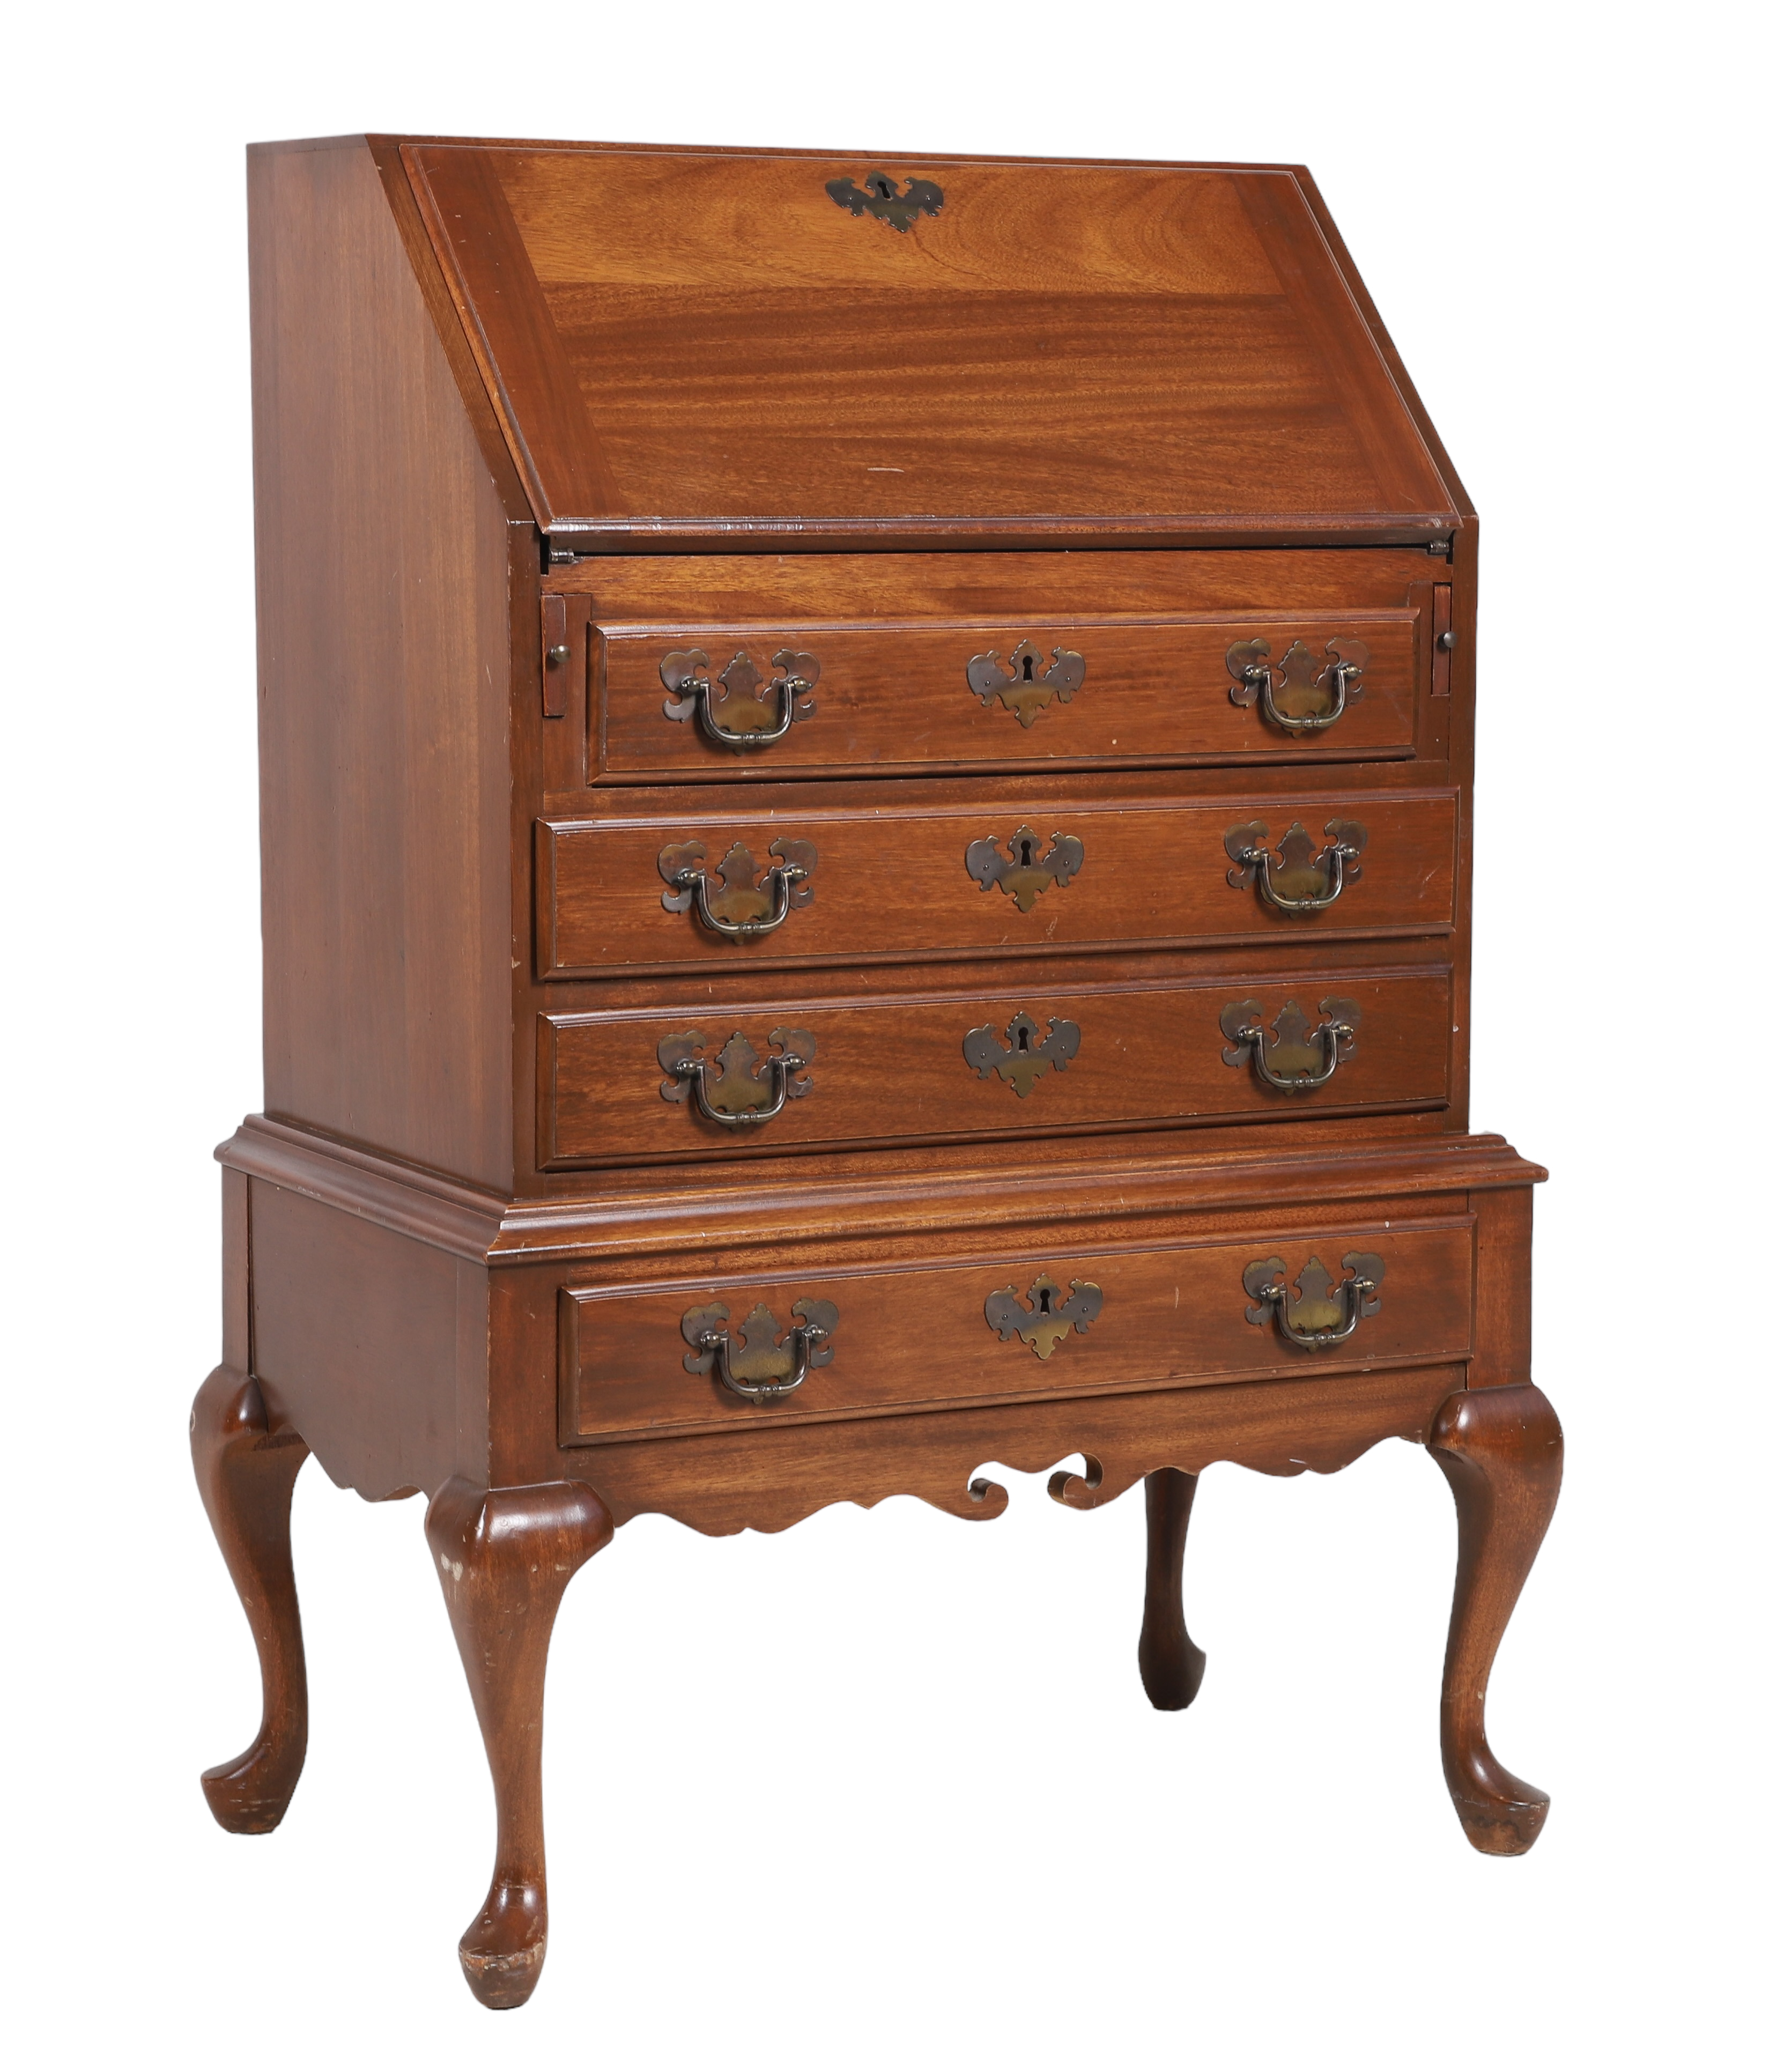 Maddox Queen Anne style mahogany